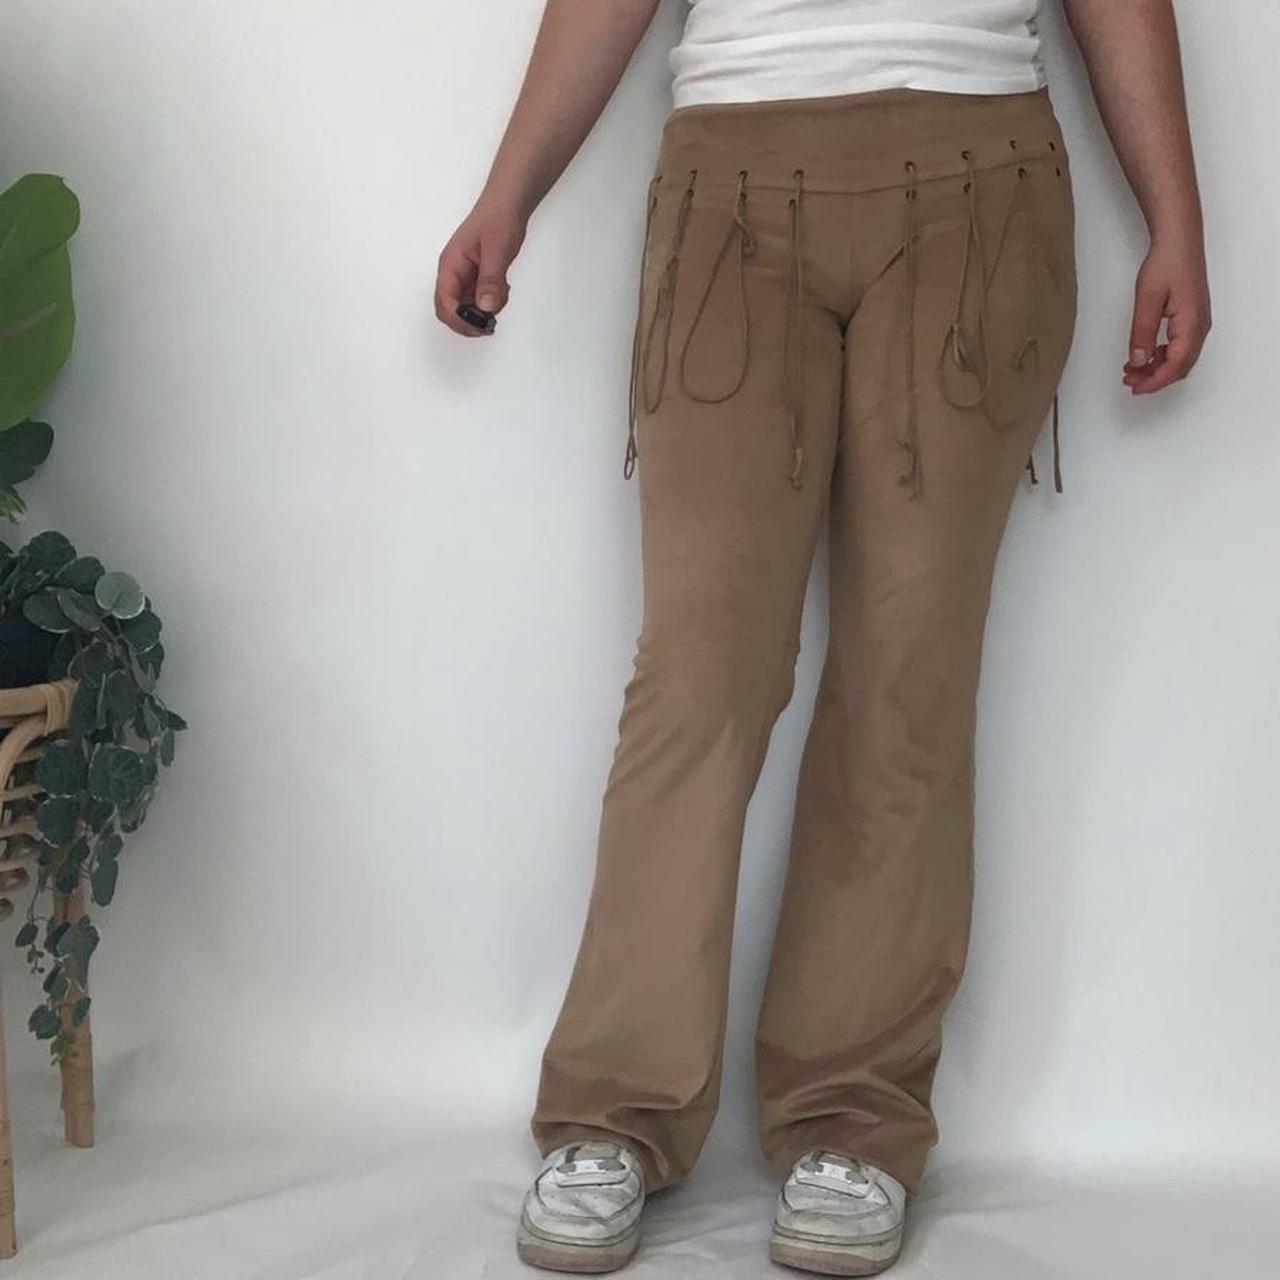 Y2K COOL GIRL 🧞‍♀️ vintage y2k tan suede flared trousers with fringe